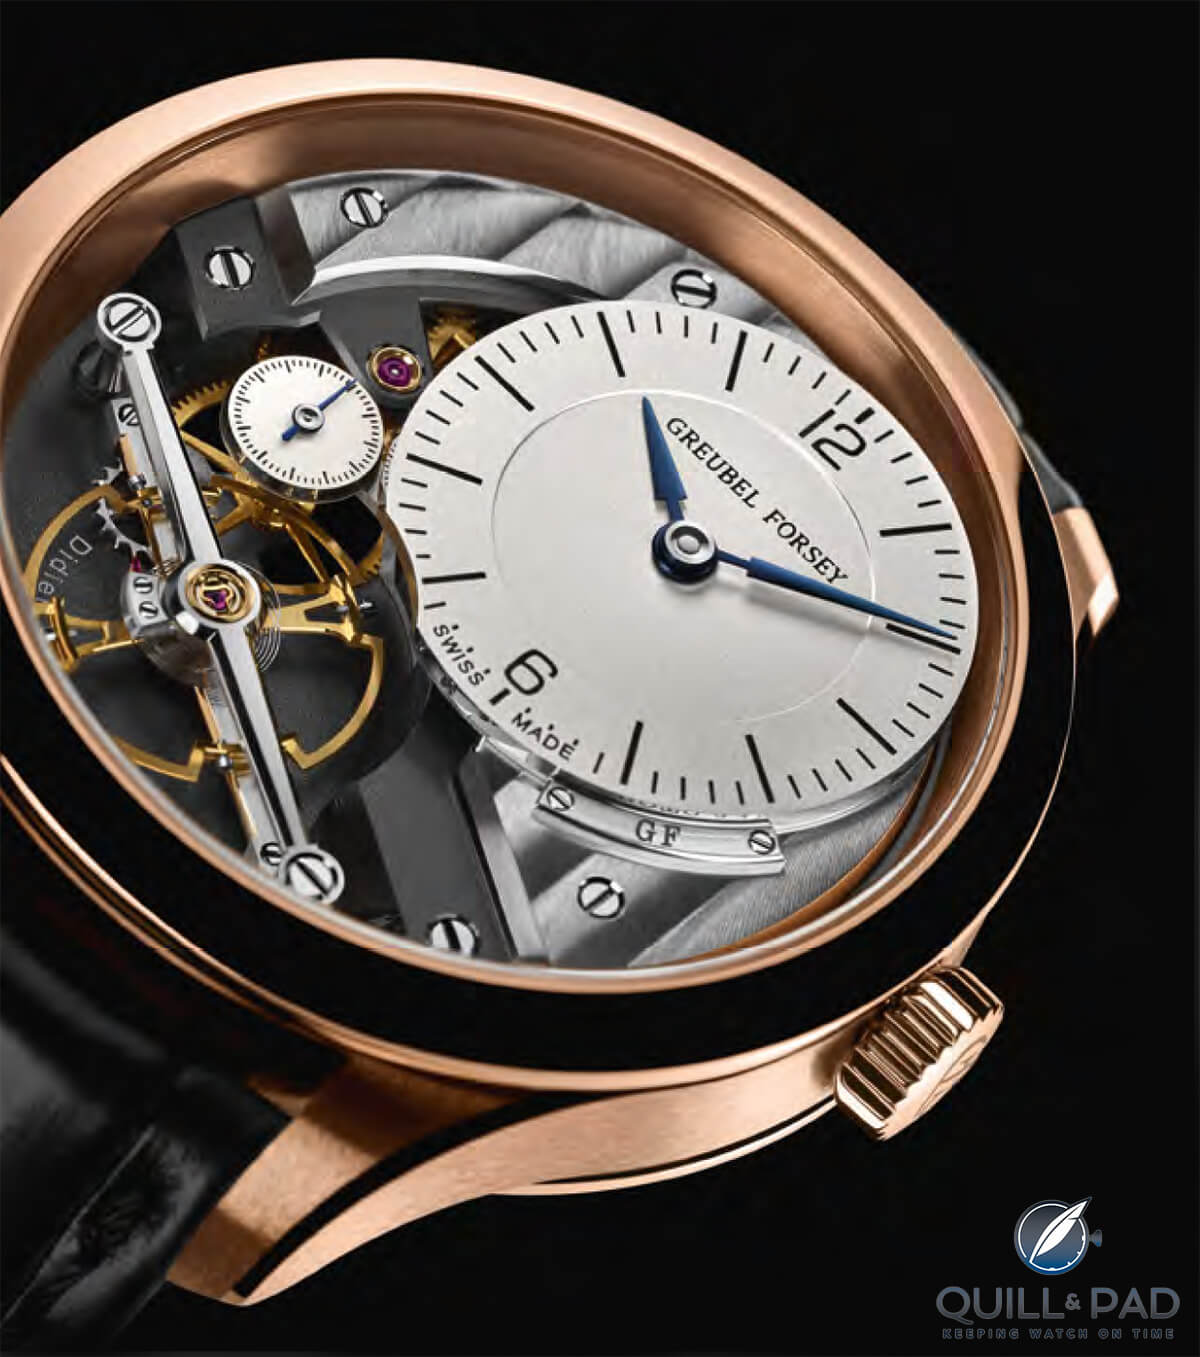 Red gold Greubel Forsey Signature 1 by Didier Cretin